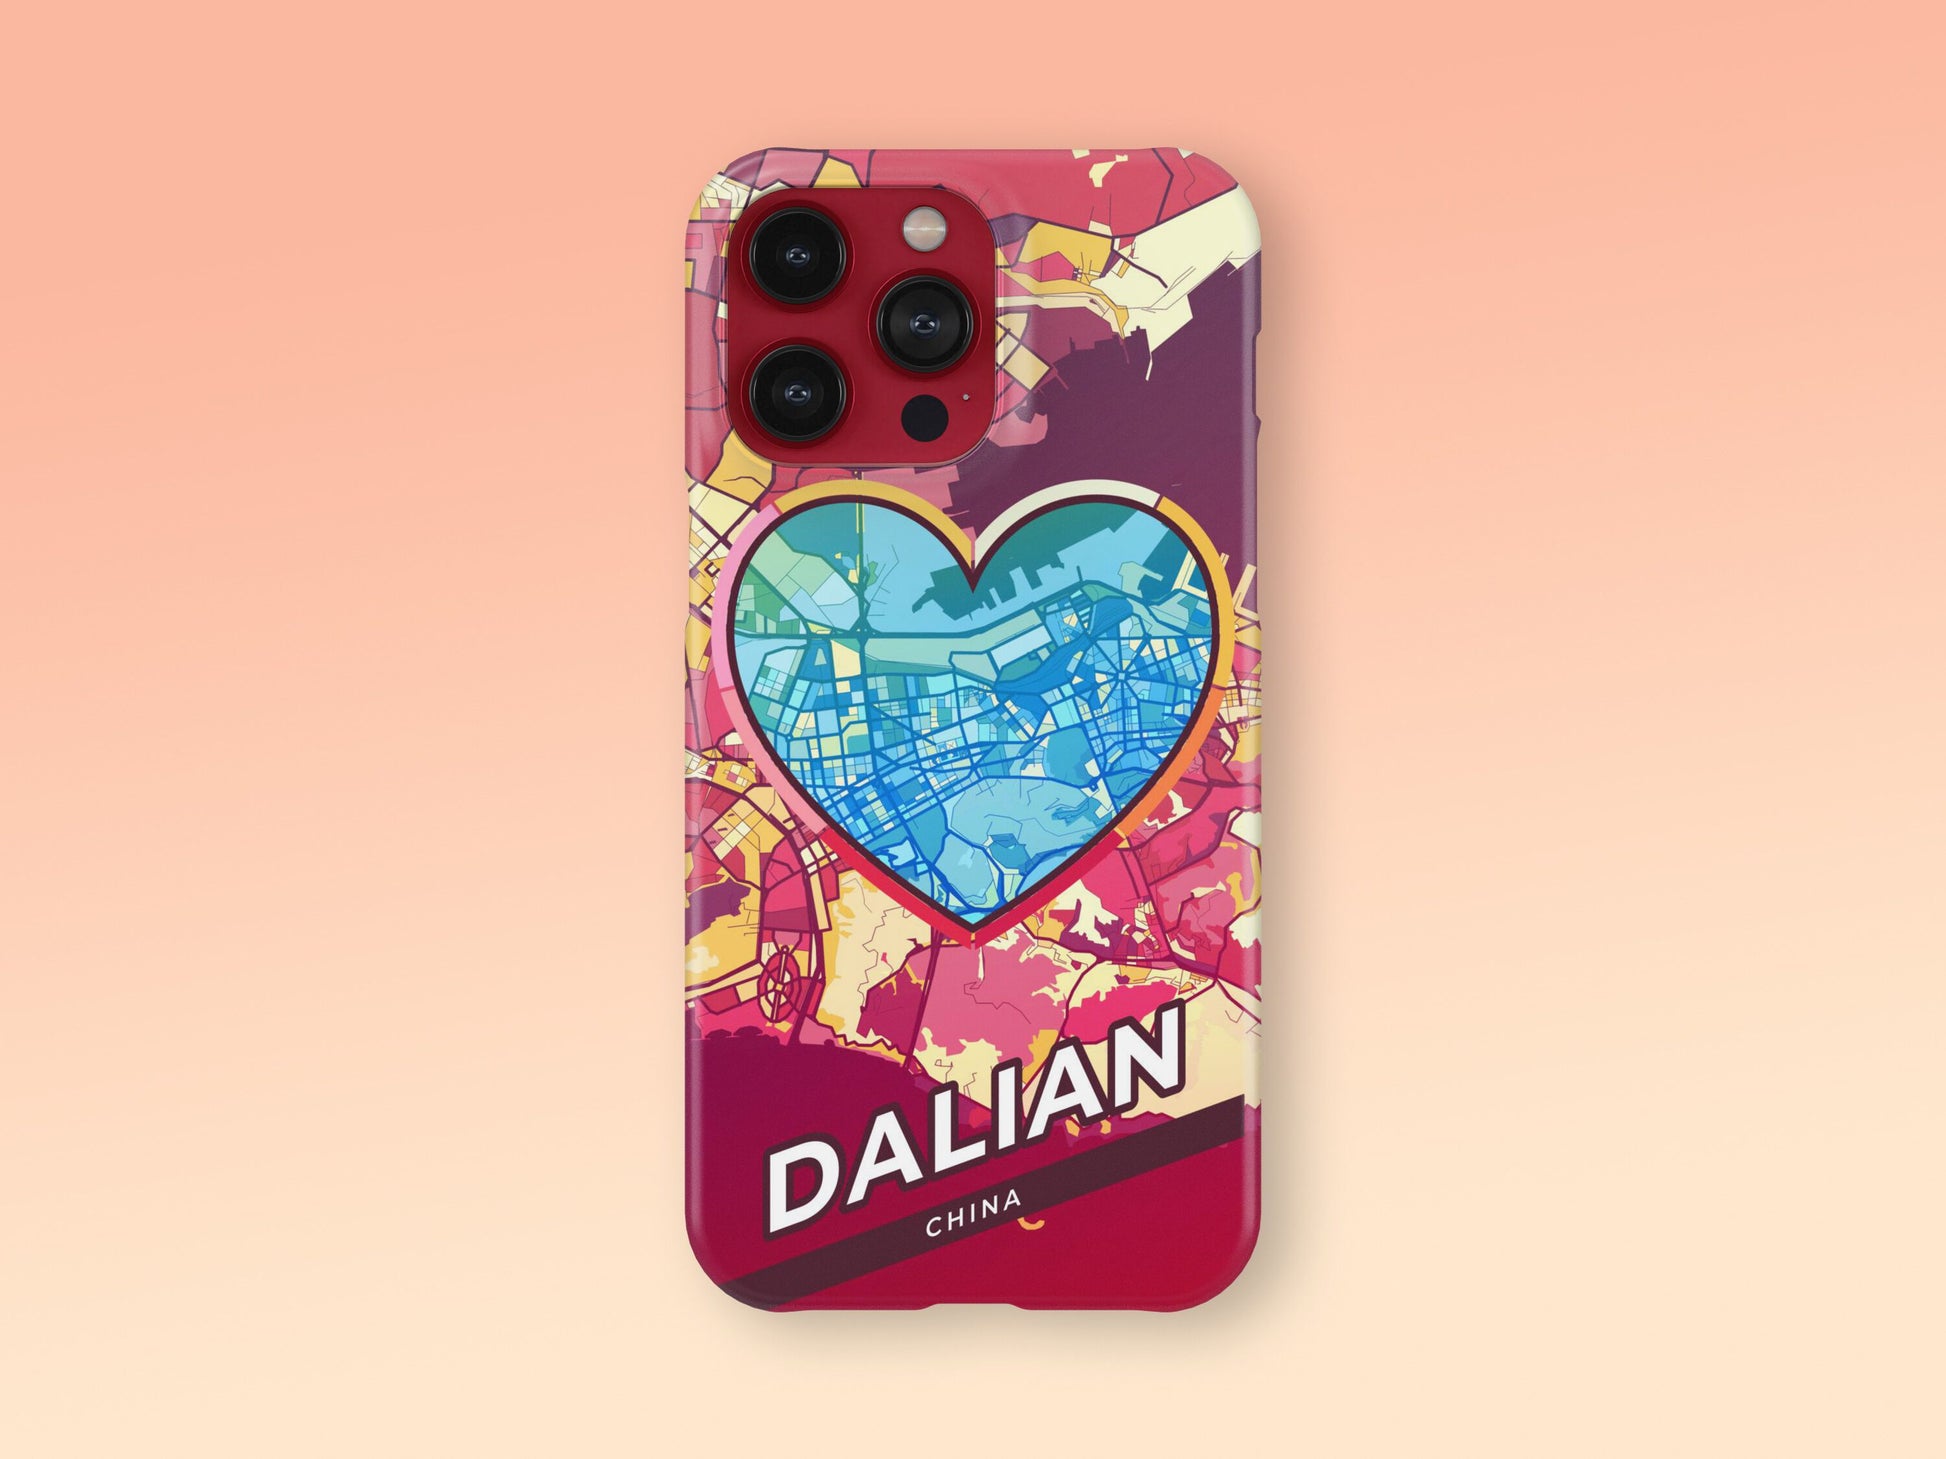 Dalian China slim phone case with colorful icon. Birthday, wedding or housewarming gift. Couple match cases. 2